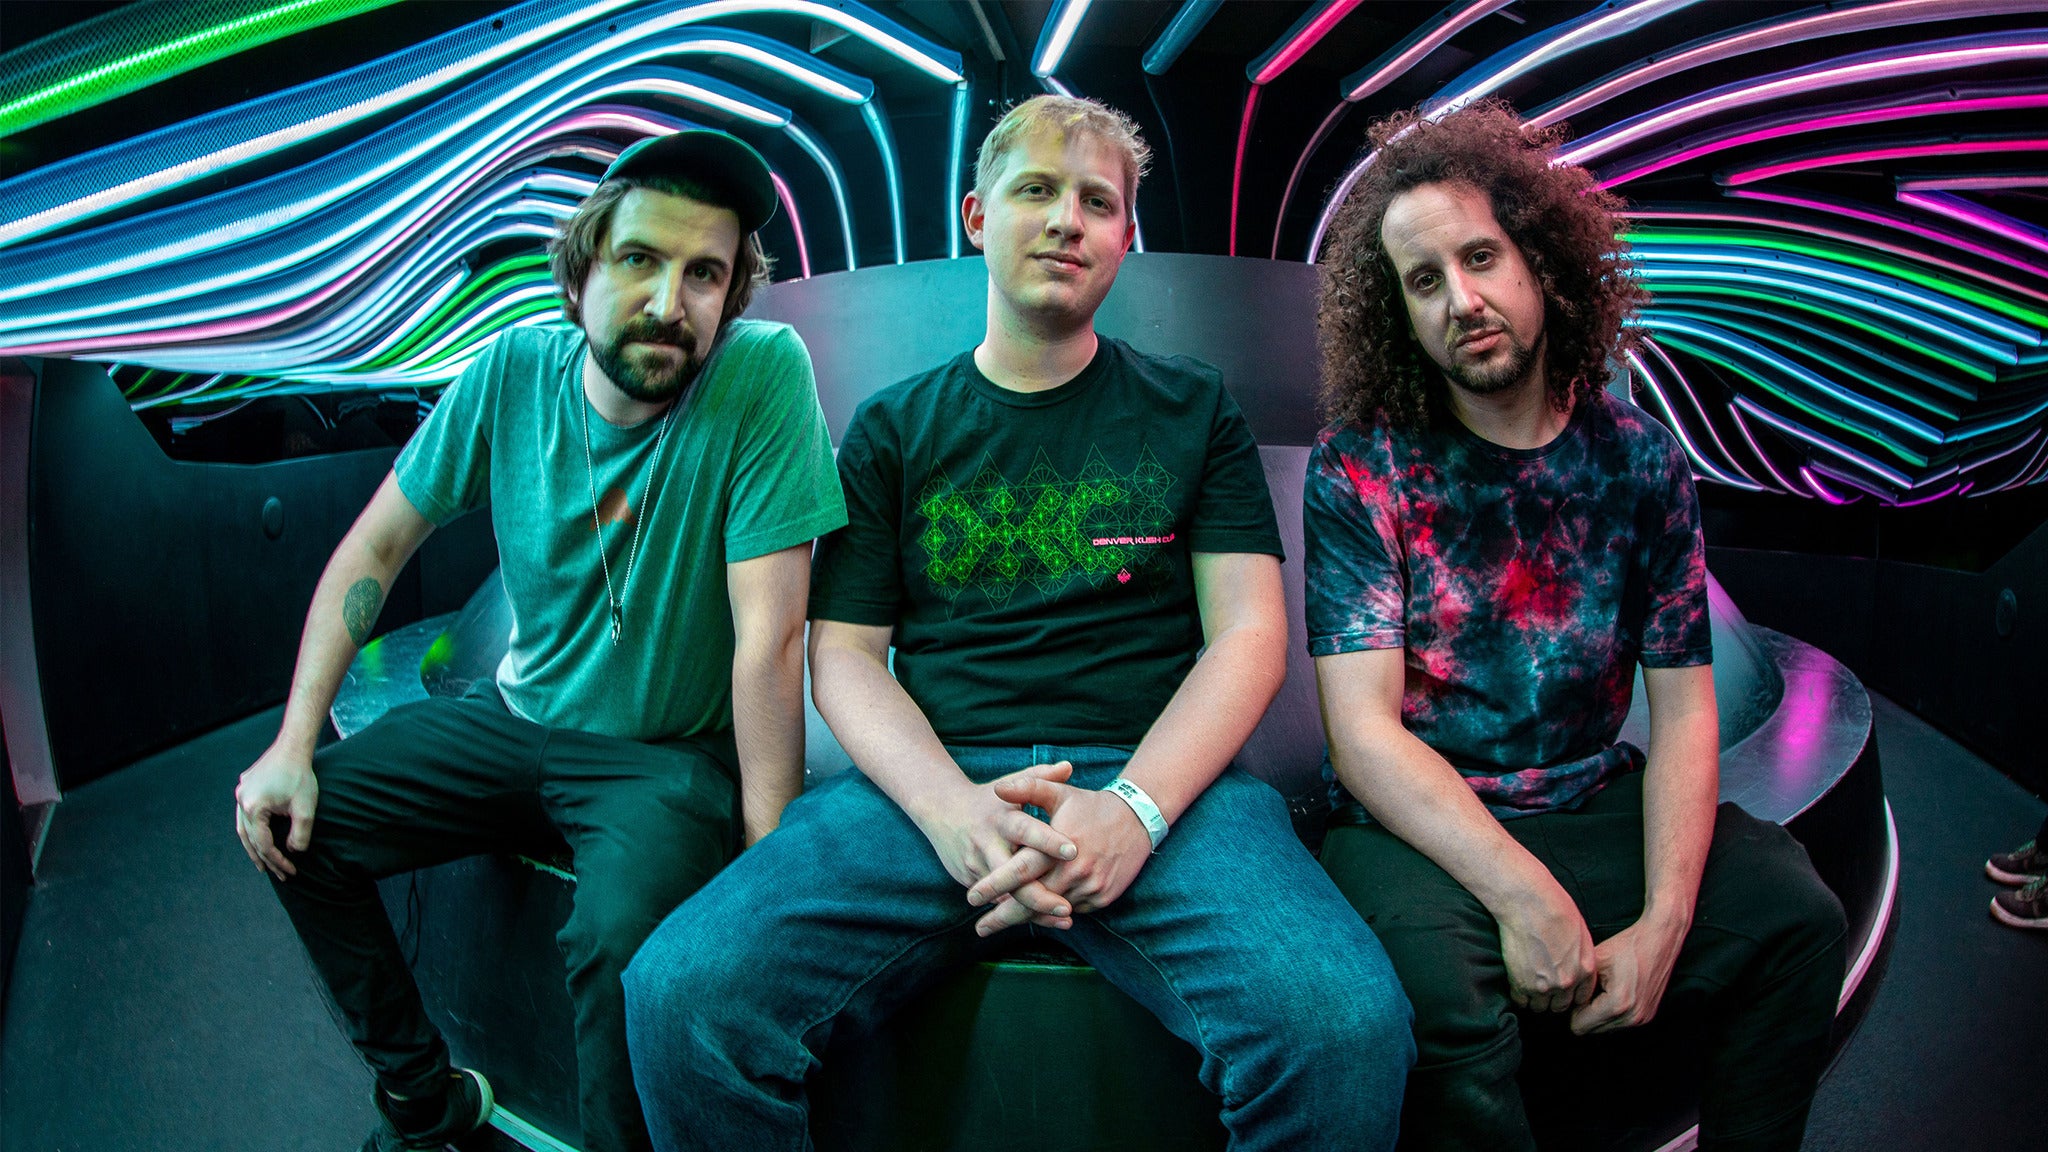 Sunsquabi & Too Many Zooz presale password for event tickets in Harrisburg, PA (XL Live)